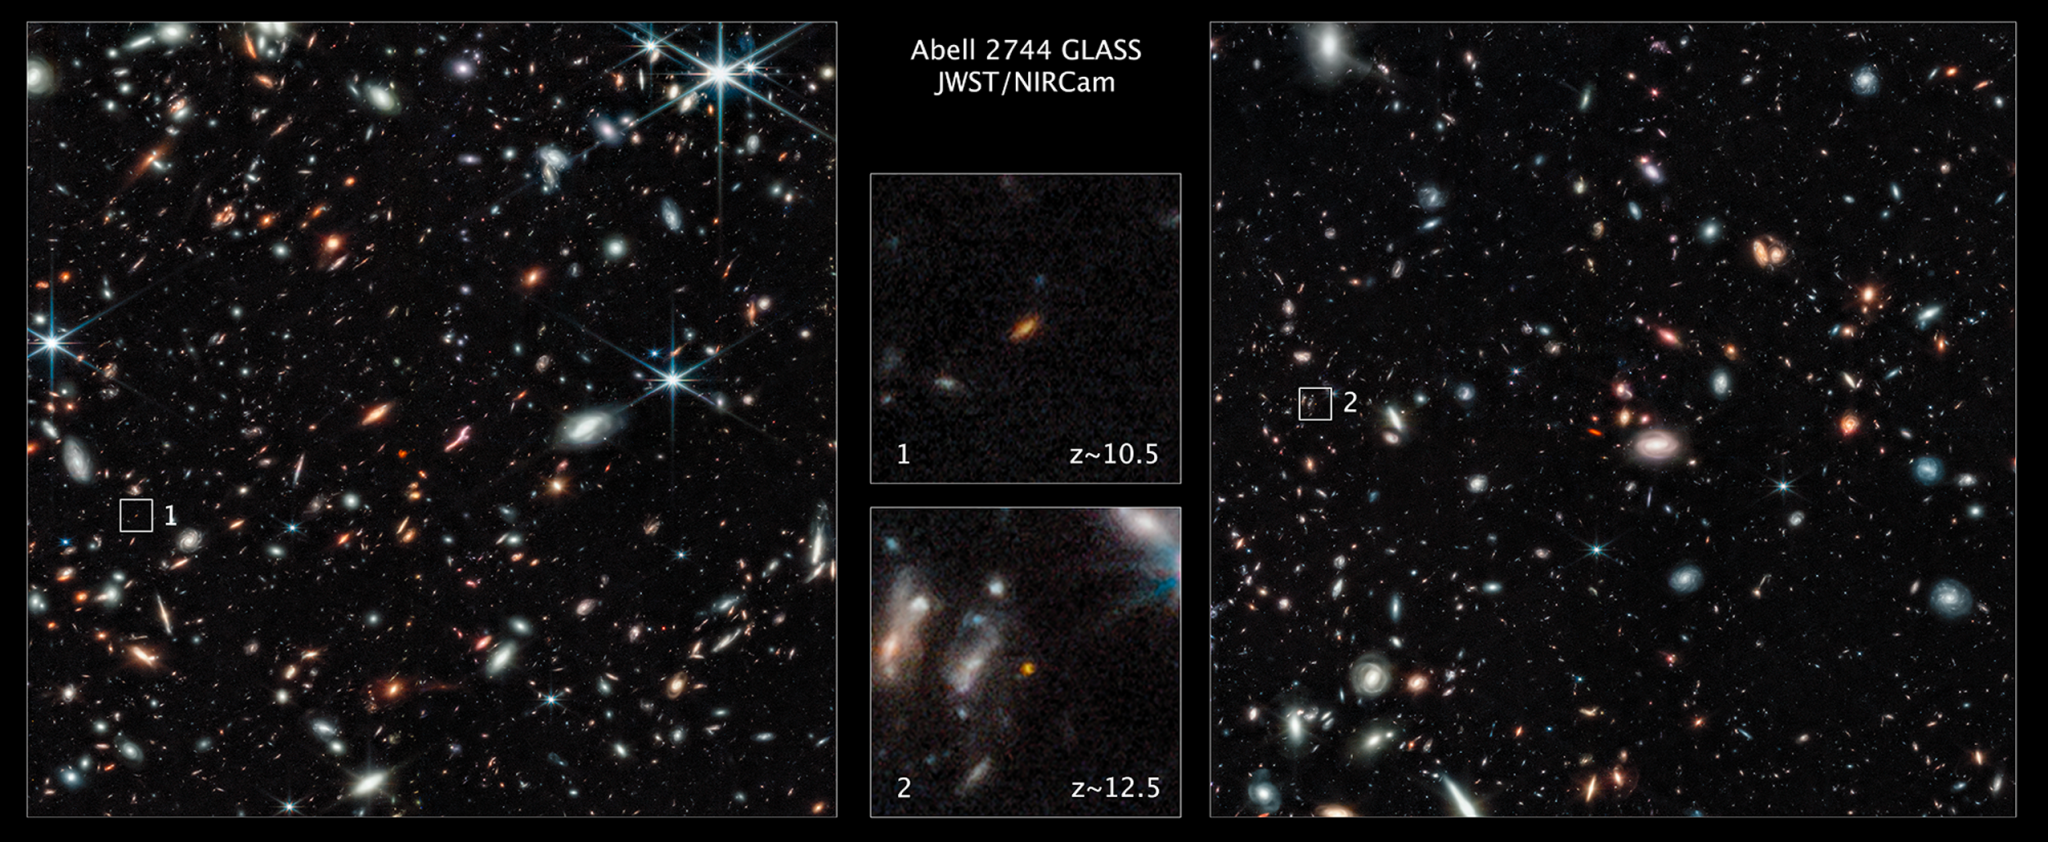 Image collage labeled u0022Abell 2744 GLASS JWST/NIRCAM.u0022 Two large frames, left and right, with countless white stars, interspersed with yellow and orange galaxies of various shapes on a black background. Two smaller center images are close ups two galaxies.